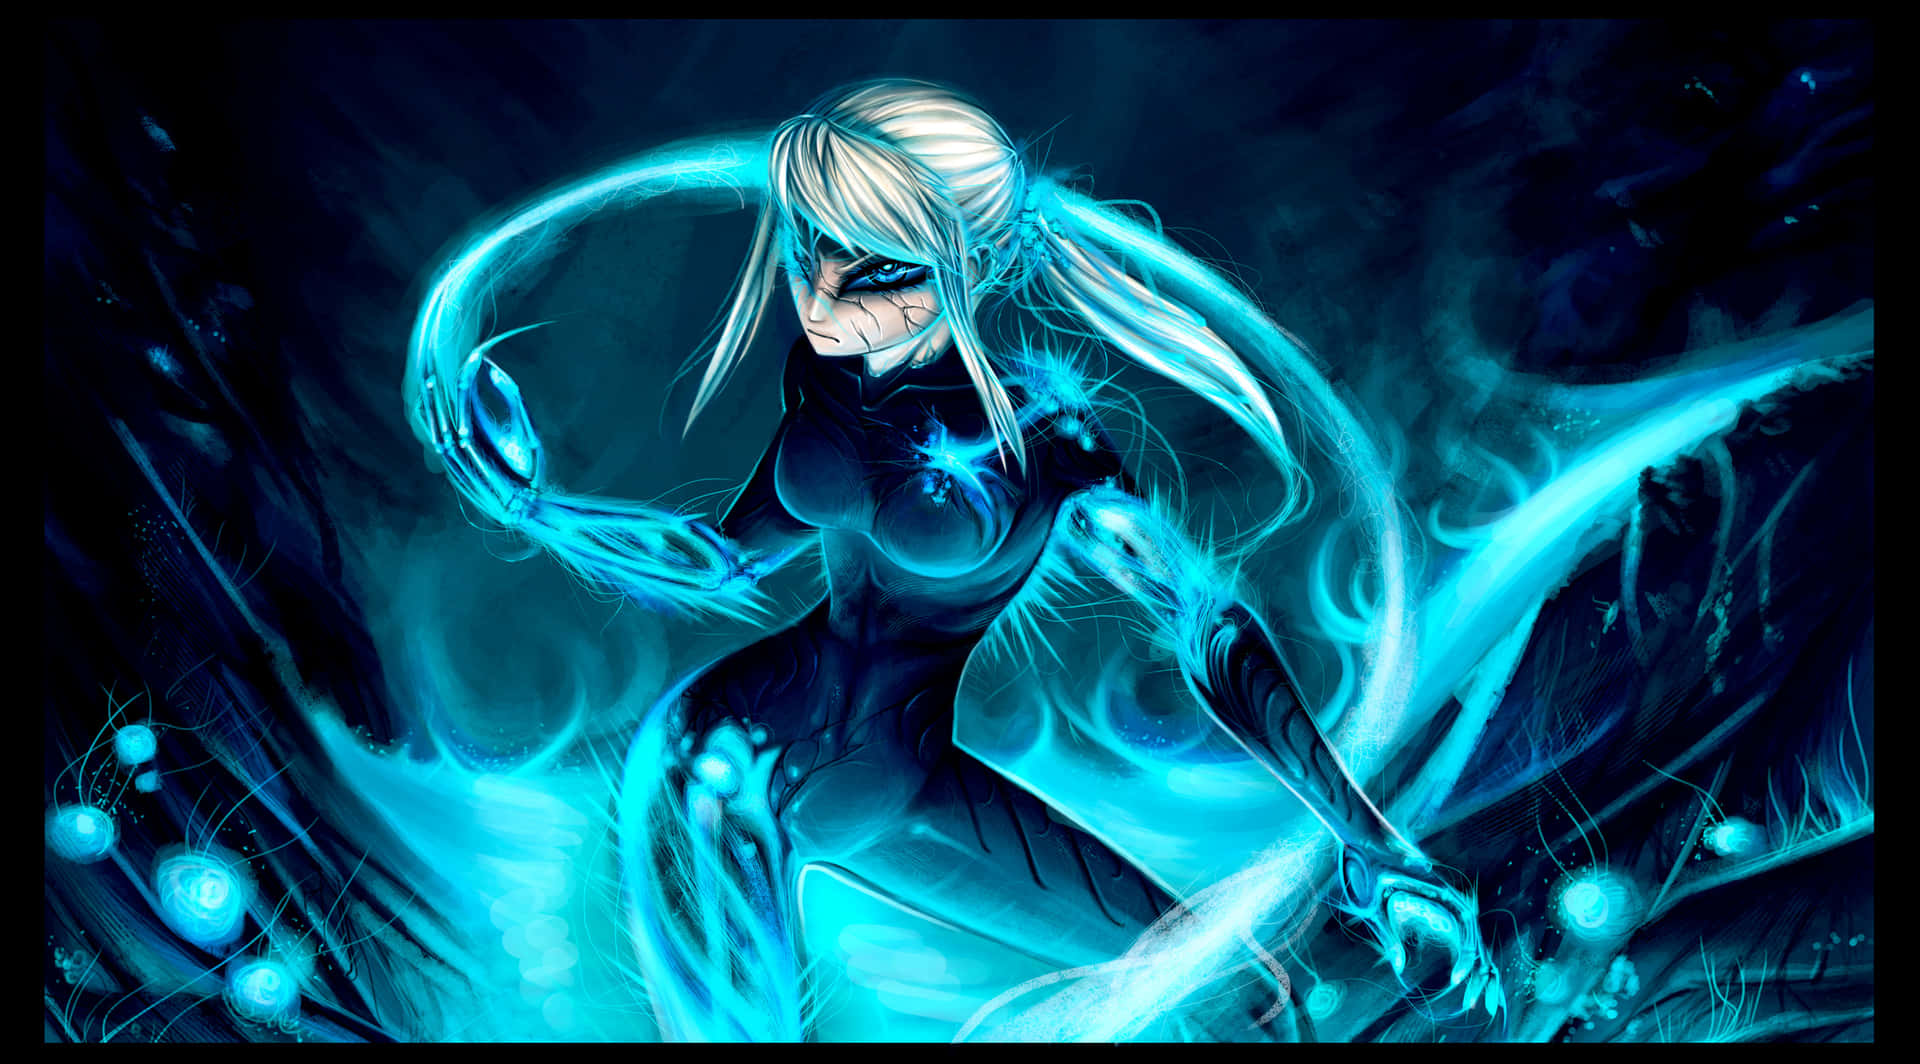 Zero Suit Samus is ready to take on her next intergalactic mission. Wallpaper